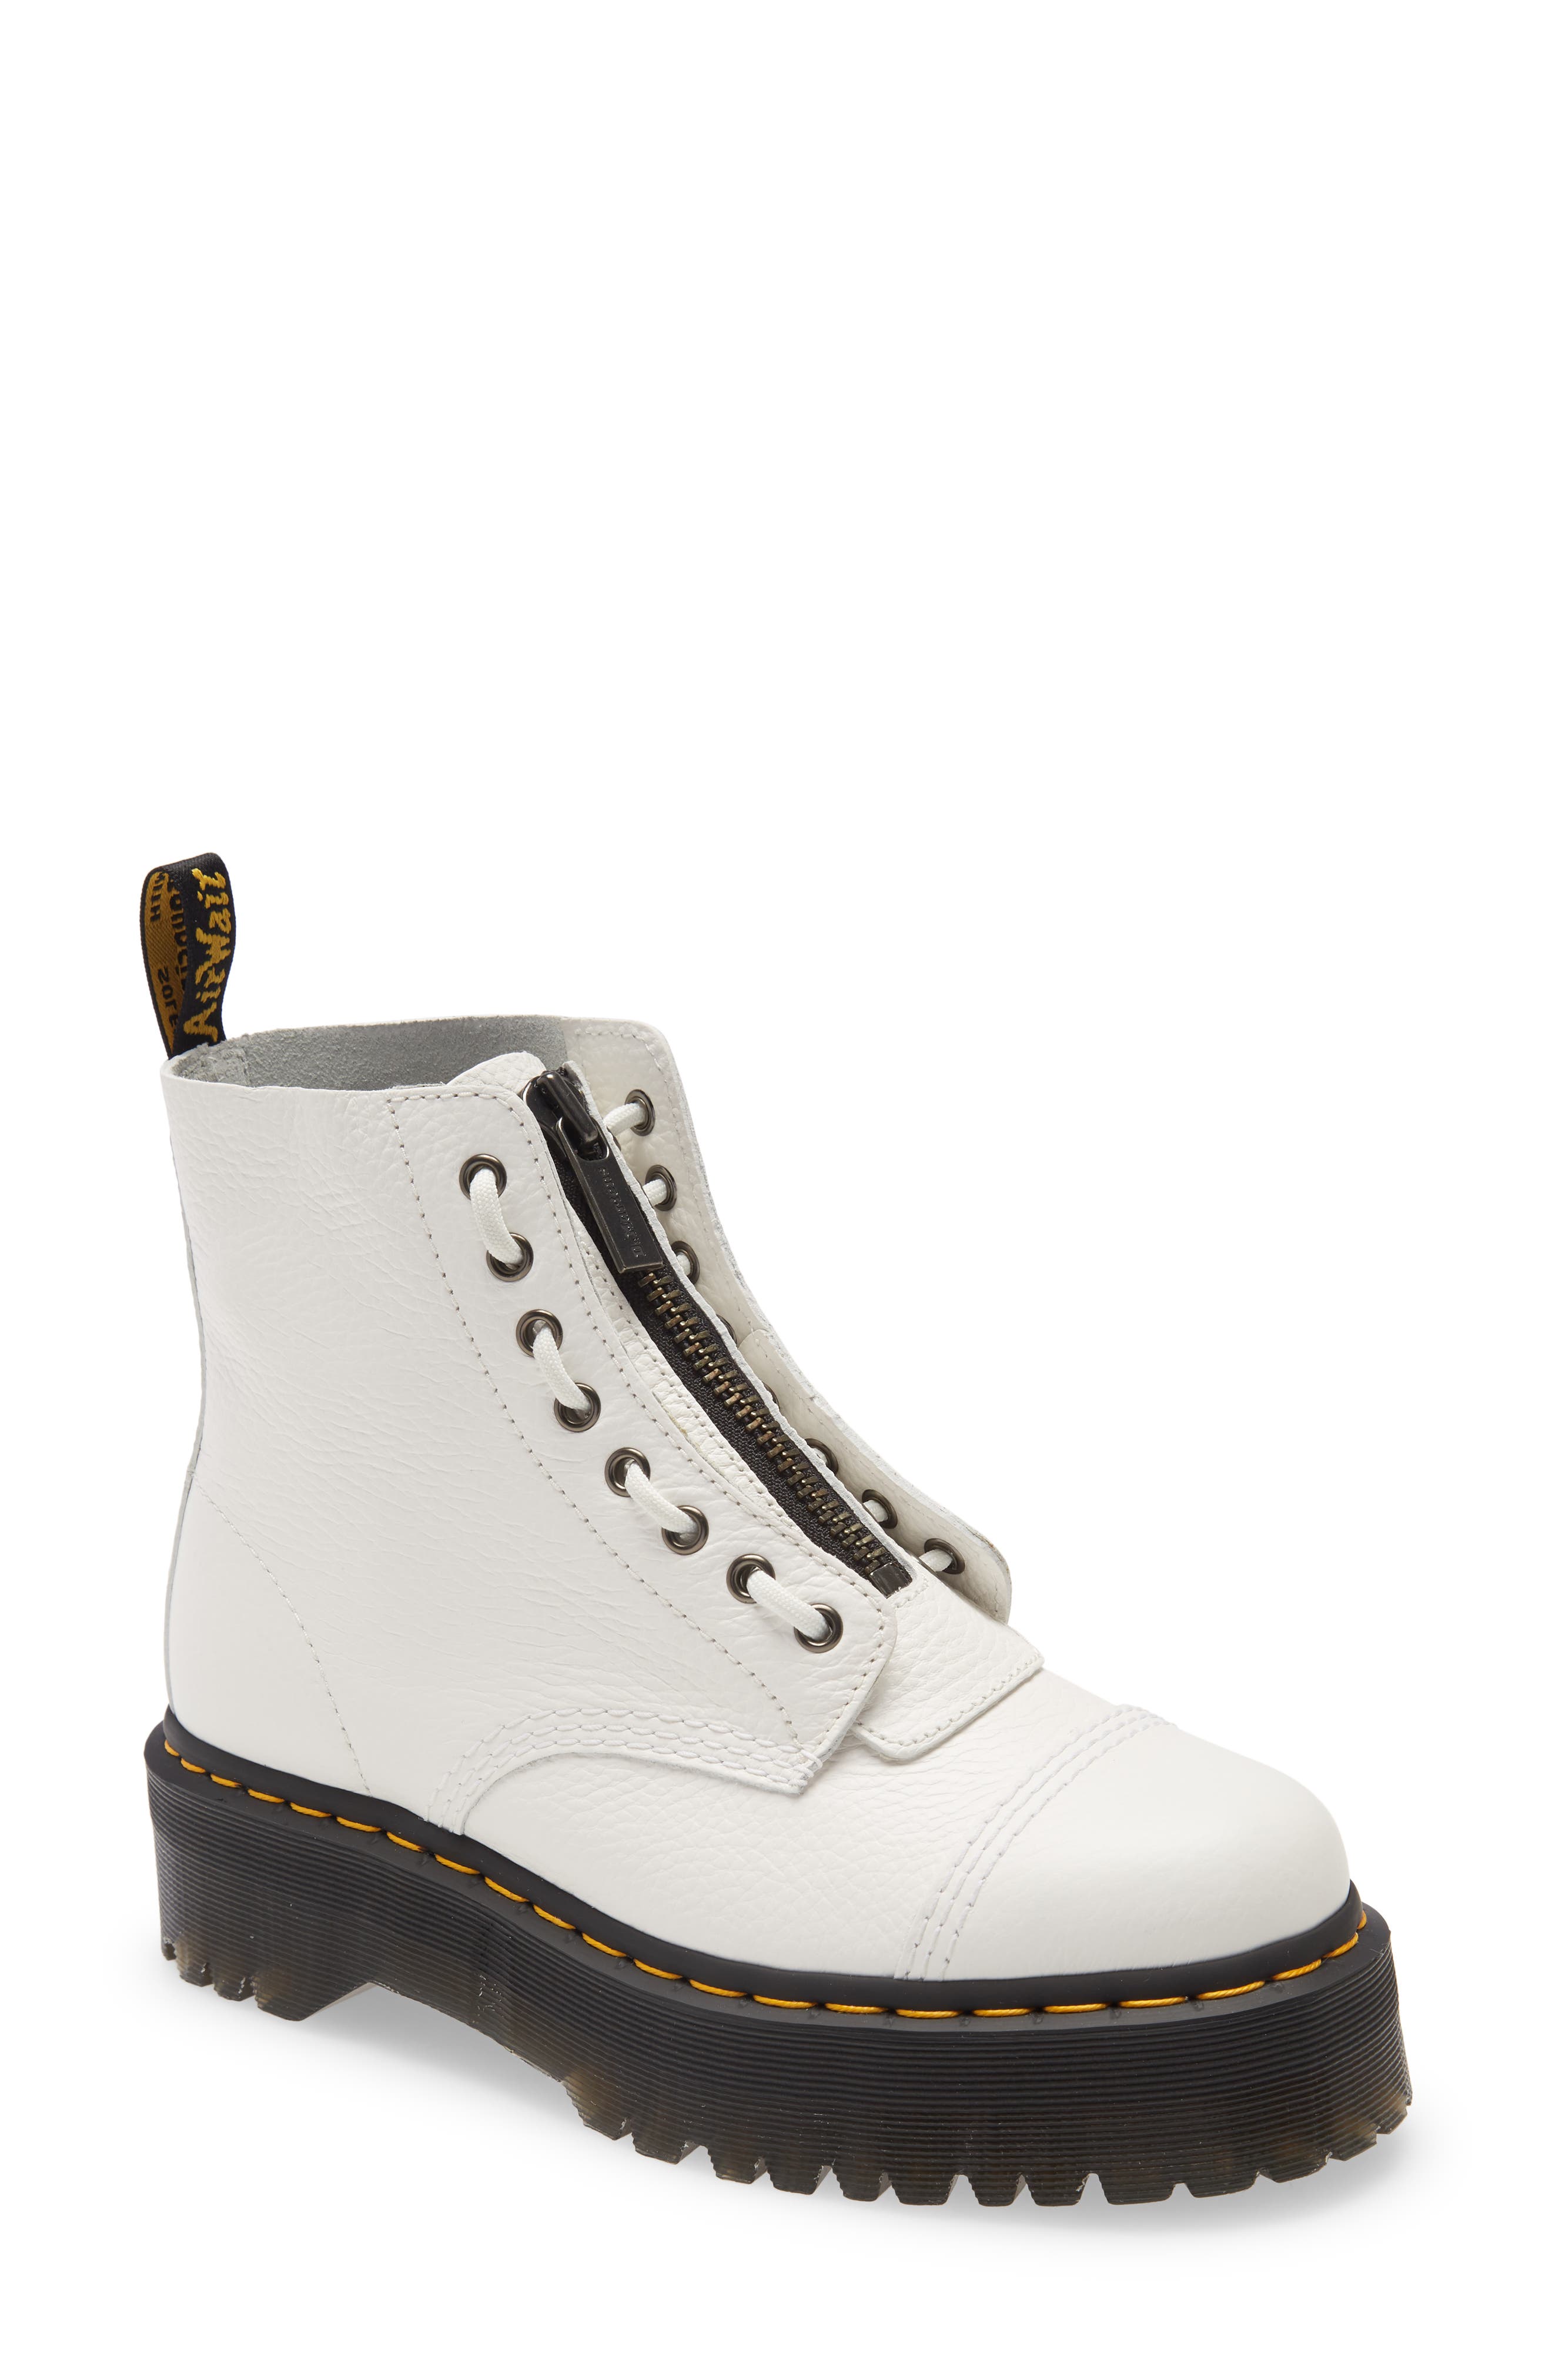 Dr. Martens Sinclair Bootie in White at Nordstrom, Size 5Us